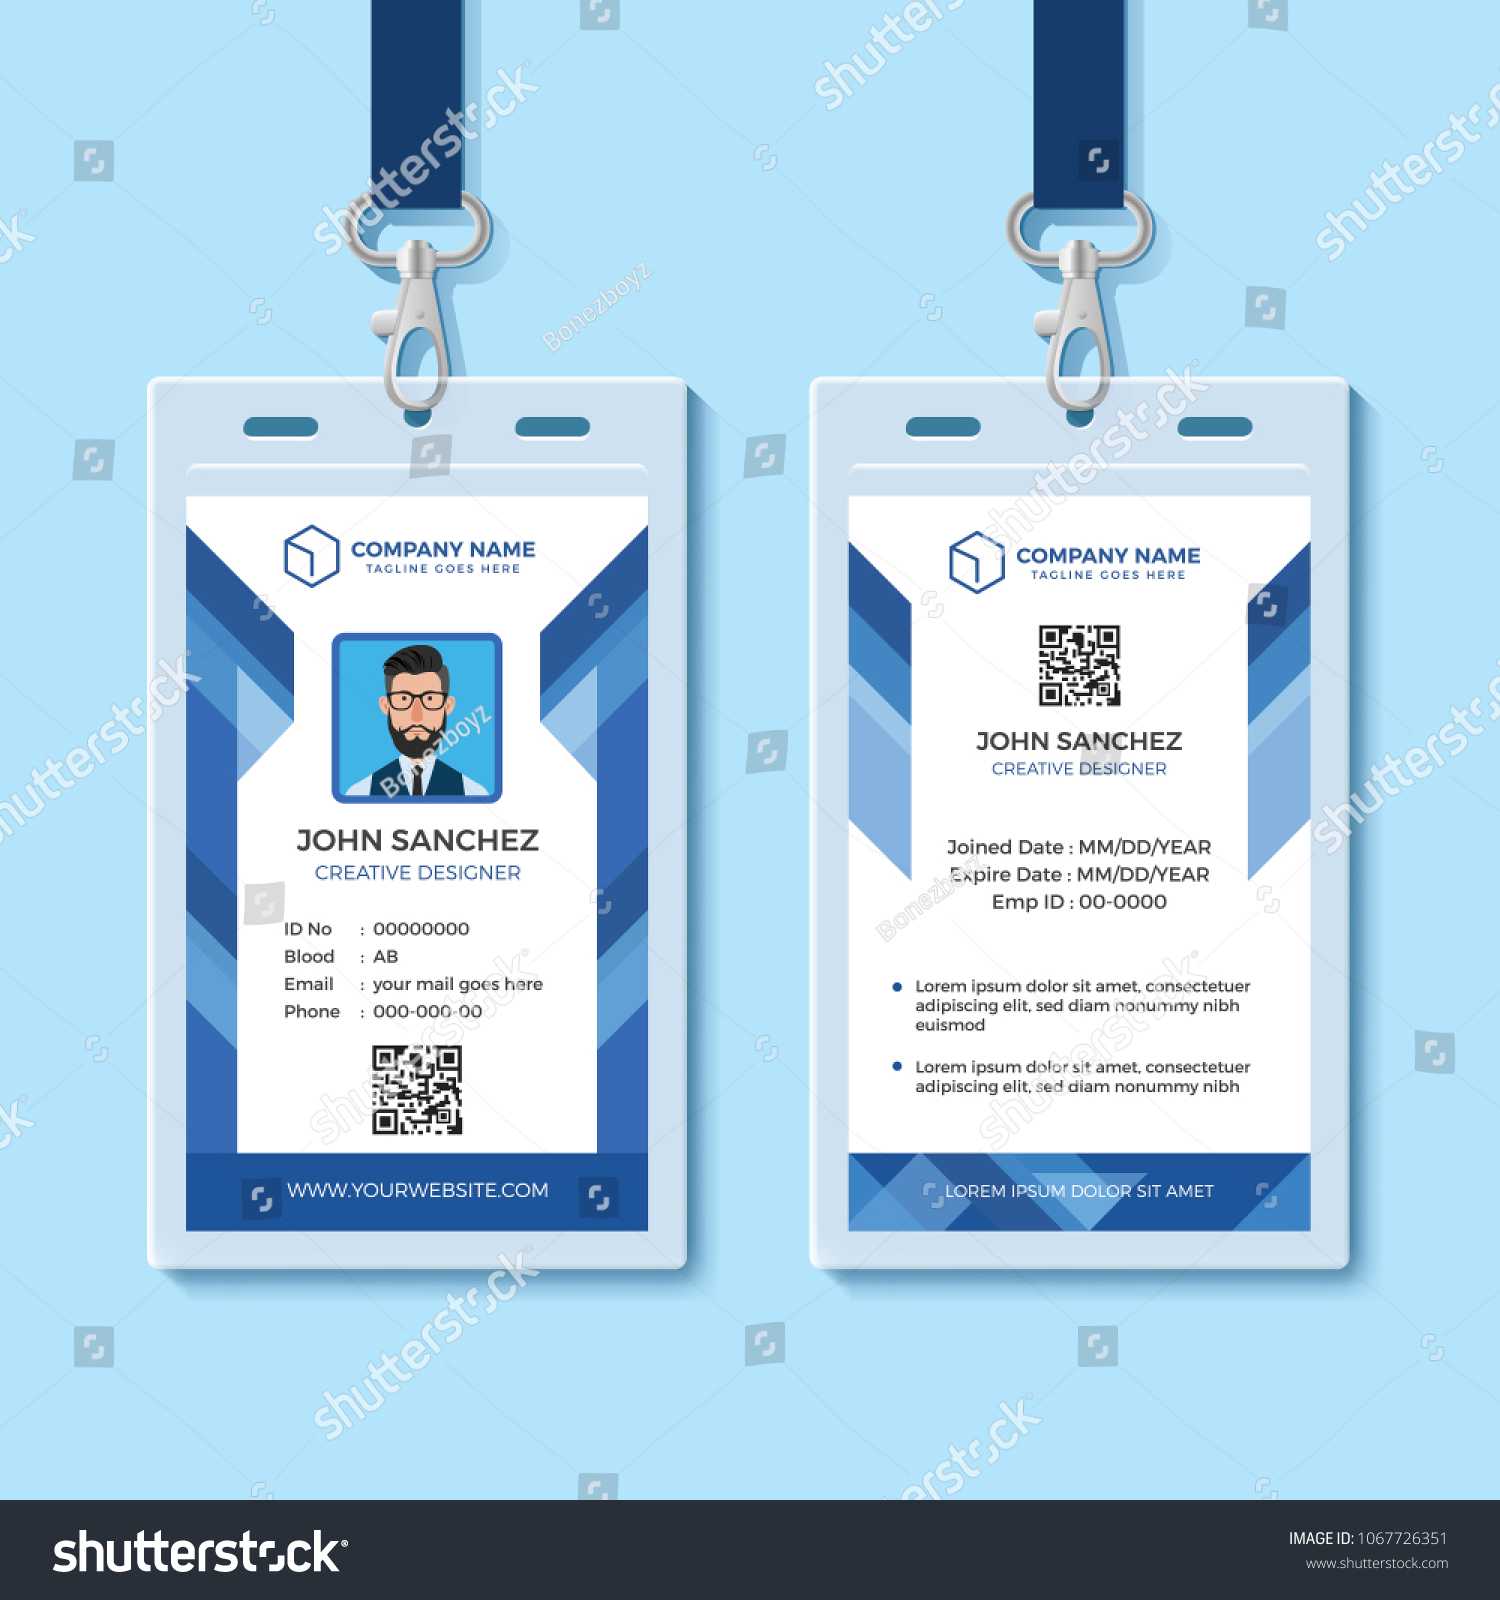 Id Card Images, Stock Photos & Vectors | Shutterstock Intended For Free Id Card Template Word